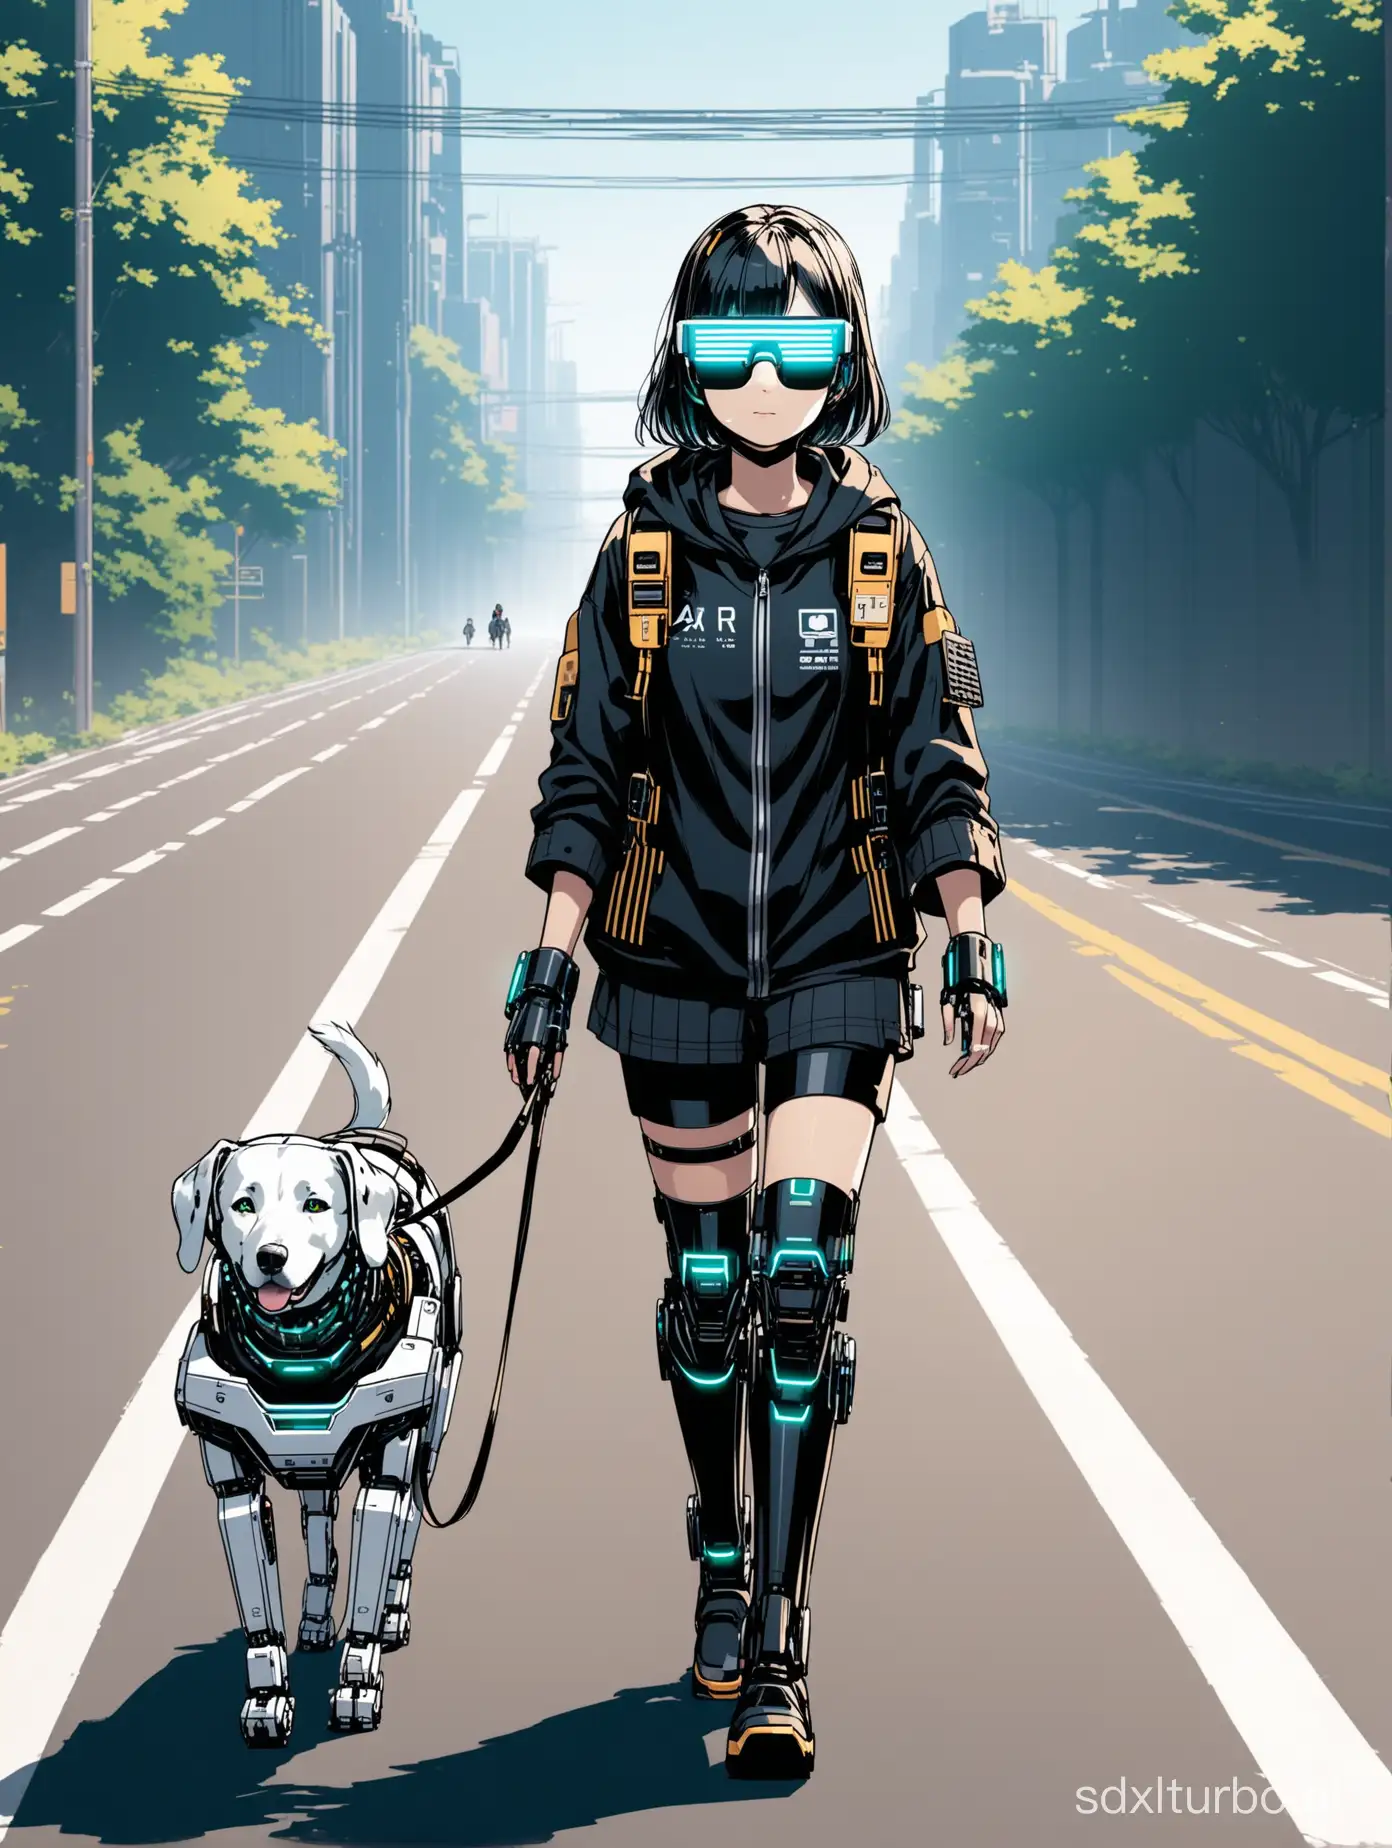 Cyberpunk-Robotic-Guide-Dog-Assists-Visually-Impaired-Girl-with-AR-Glasses-on-Urban-Journey